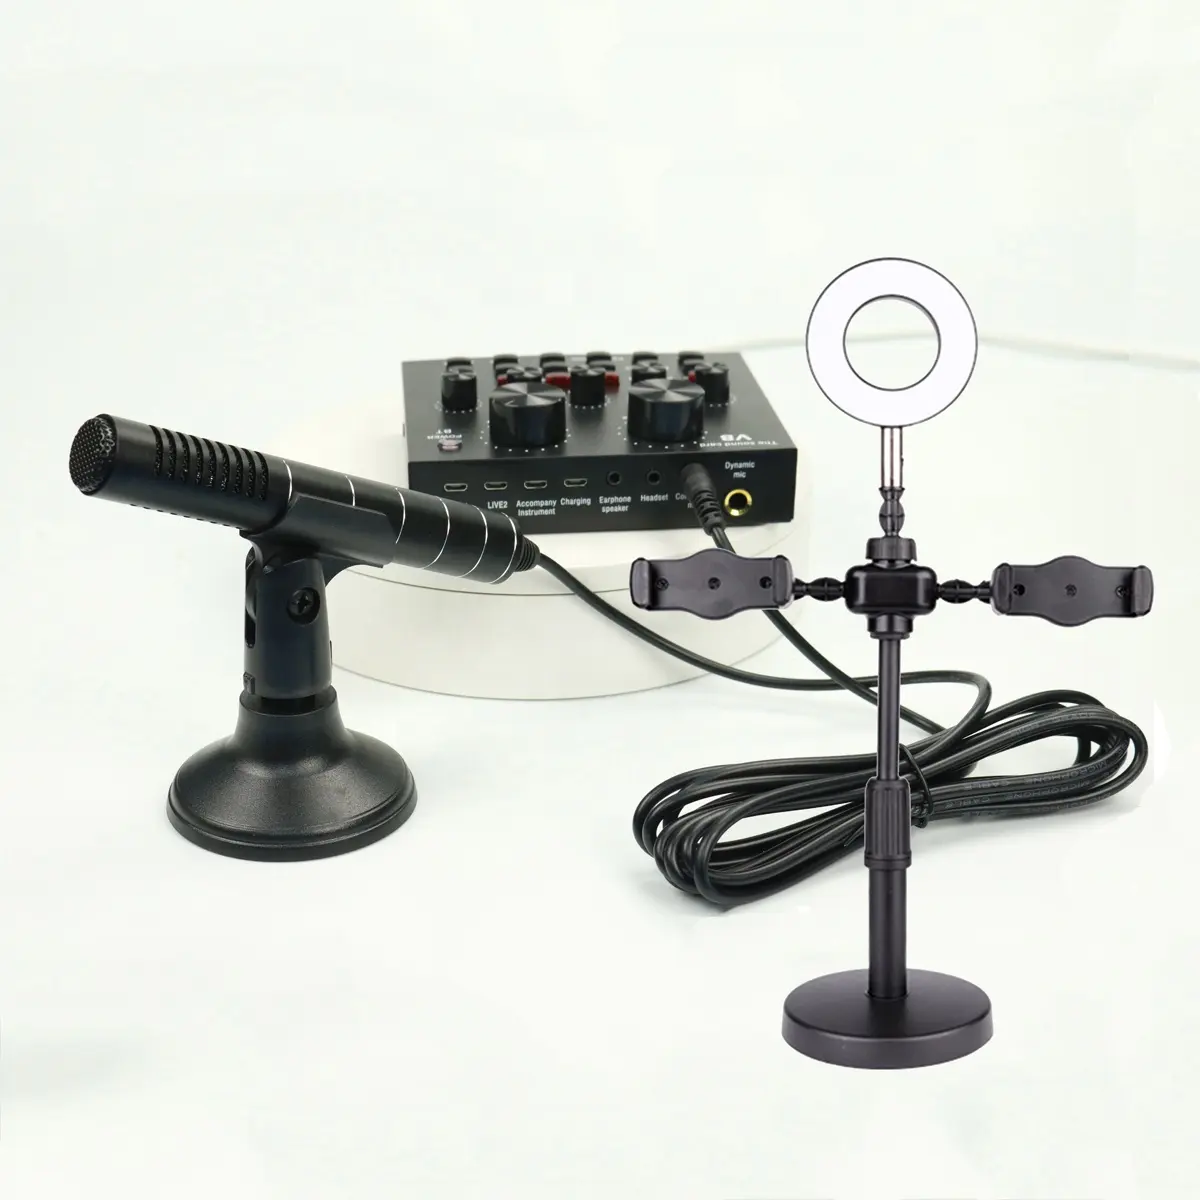 Recording and Live streaming microphone set with sound card